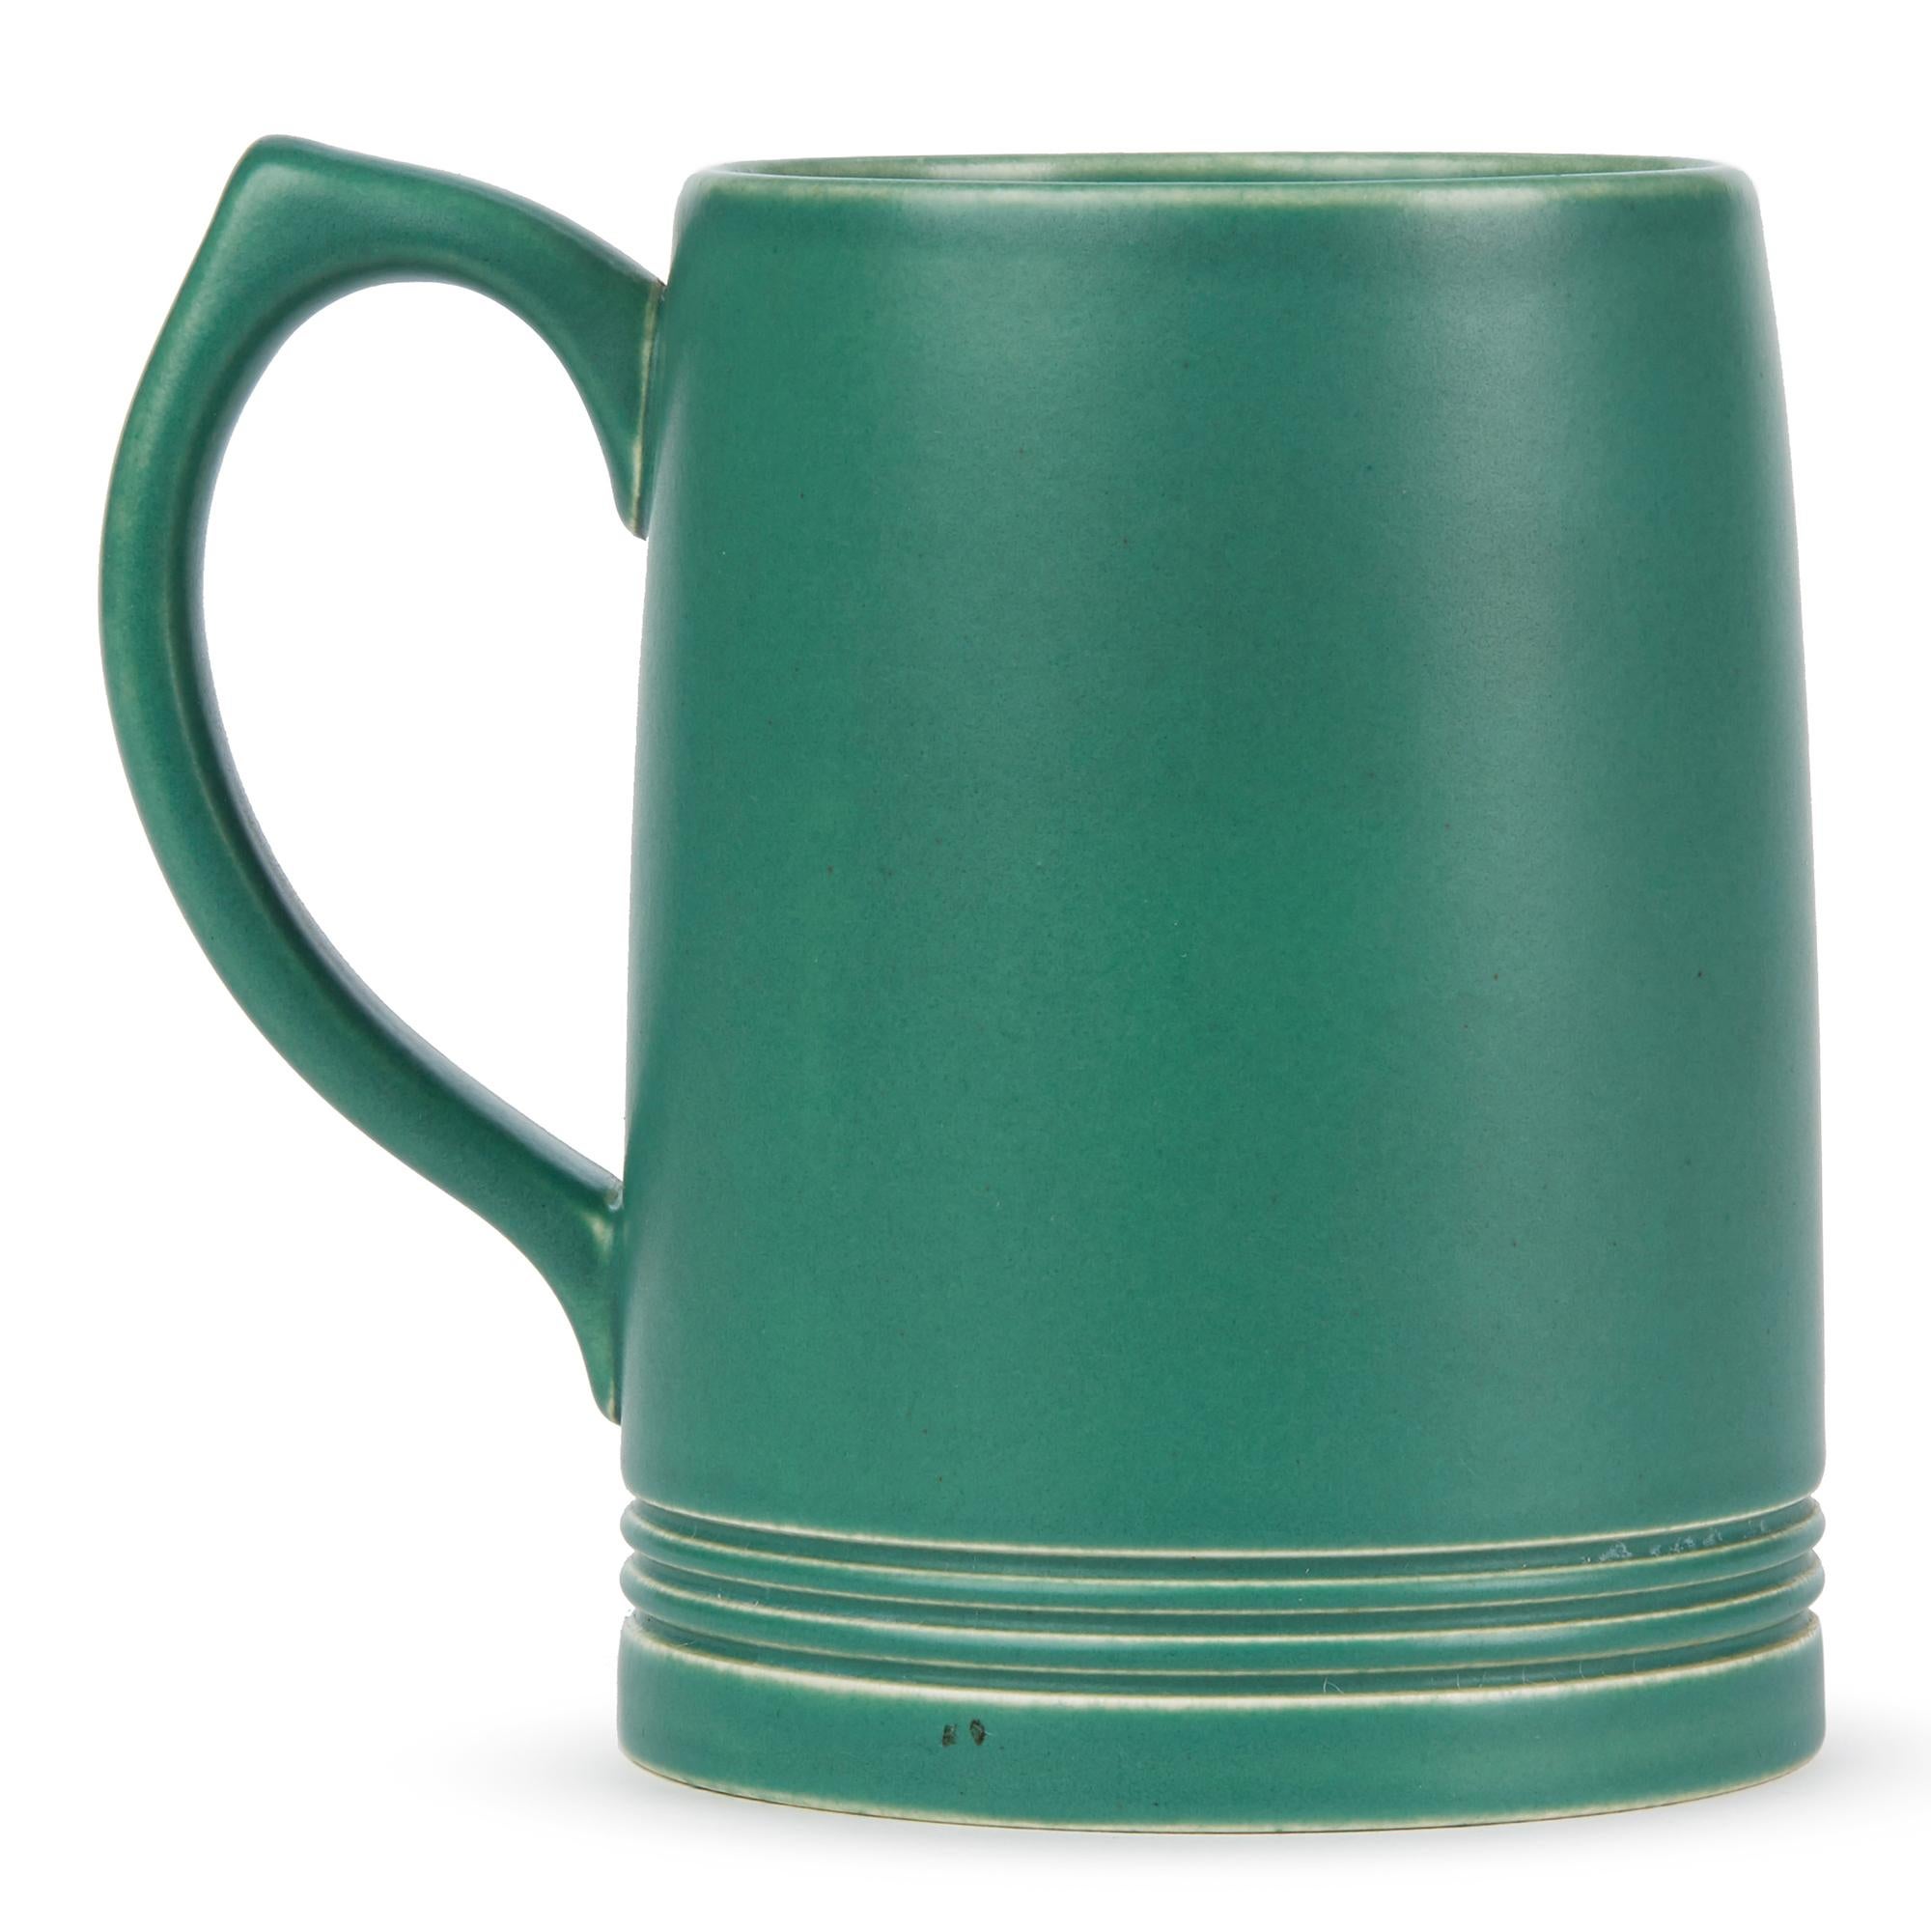 A good iconic Art Deco Wedgwood green glazed pottery mug designed by Keith Murray and dating from circa 1935. The mug has an incised signature mark to the base. Offered in excellent condition.